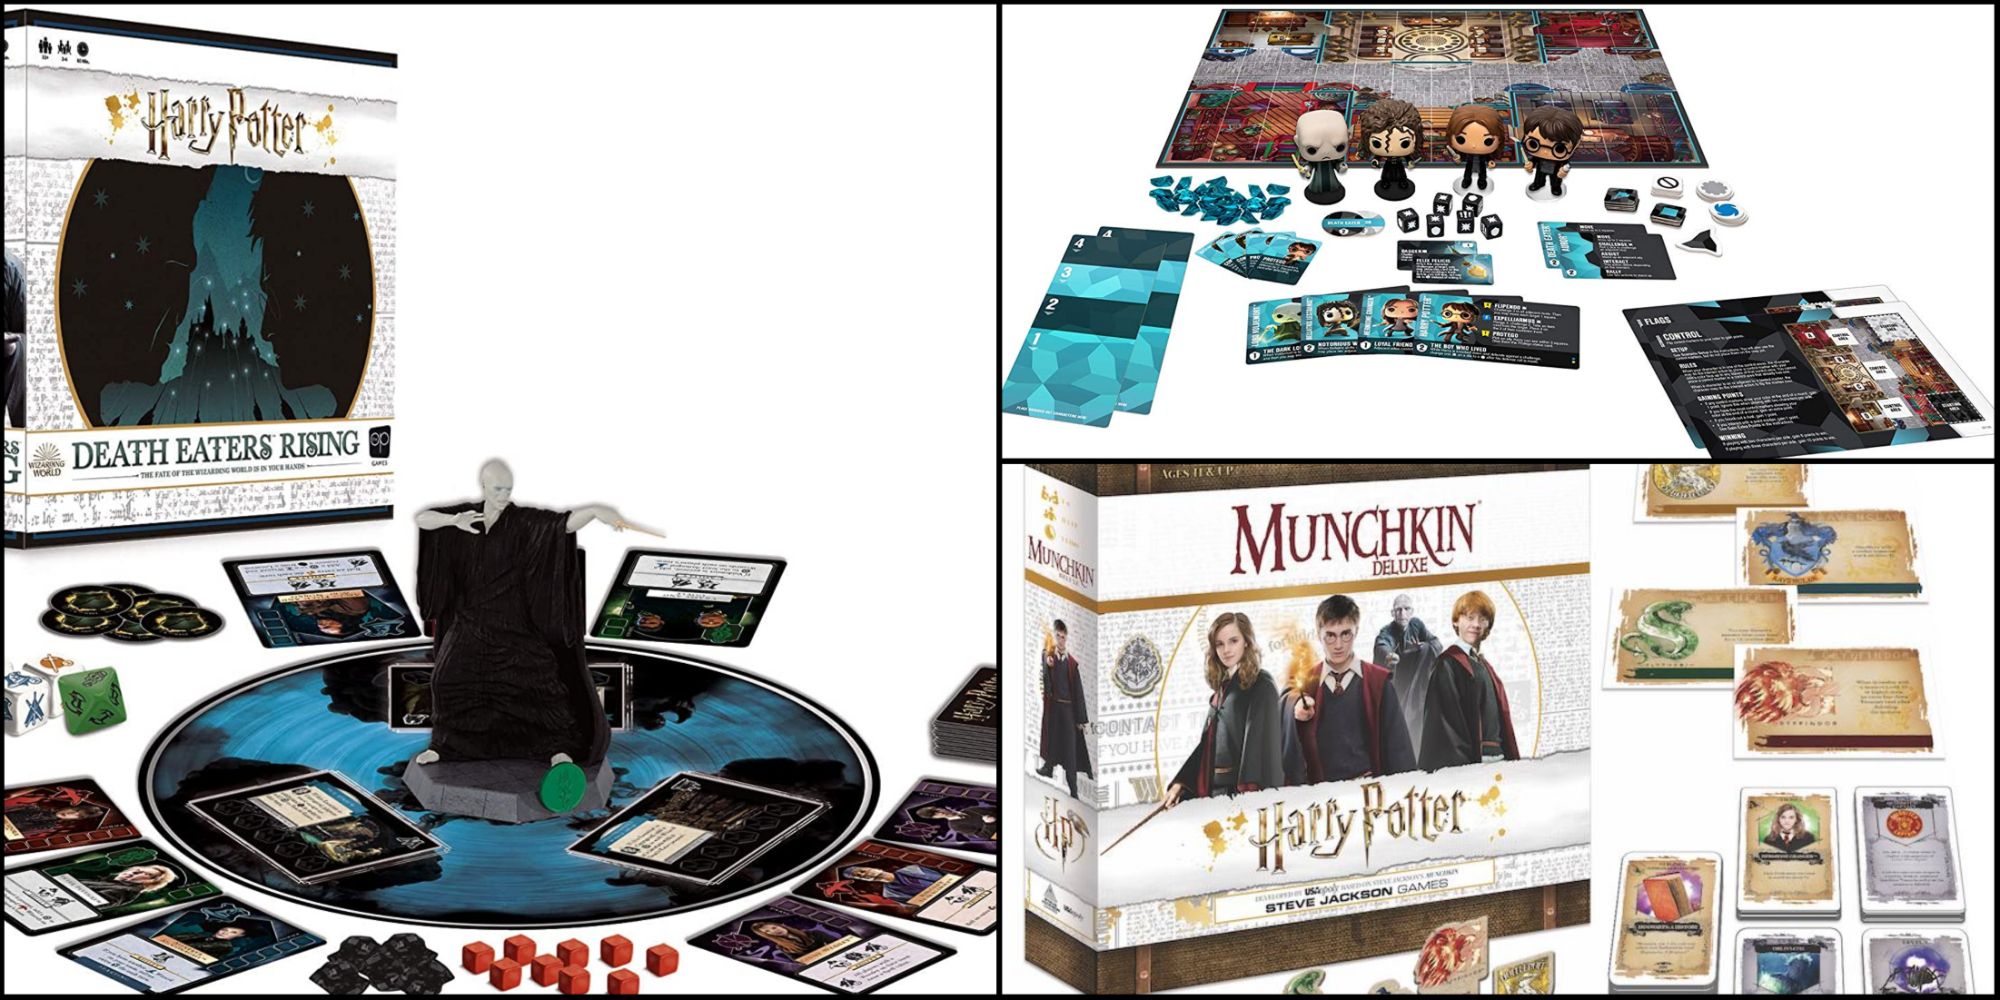 A split image of the box and game pieces for Harry Potter Death Eaters Rising, Munchkin Harry Potter Edition, and the Funkoverse Harry Potter Strategy Game